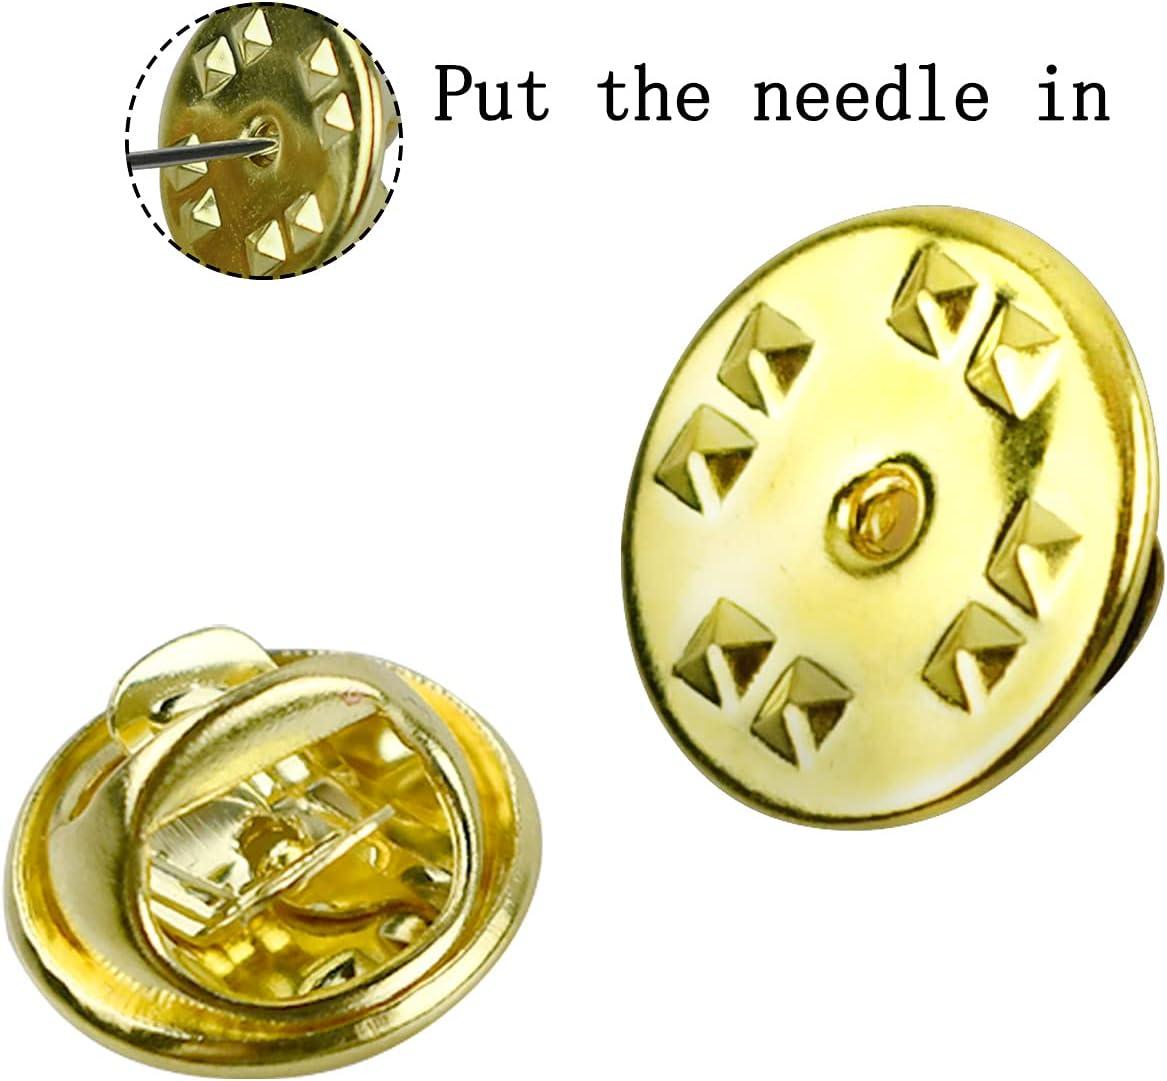 100PCS Pin Backs Metal Locking Pin Backs Brass Clutch for Brooch Tie Hat  Badge Insignia Pin Backs Replacement (Gold)